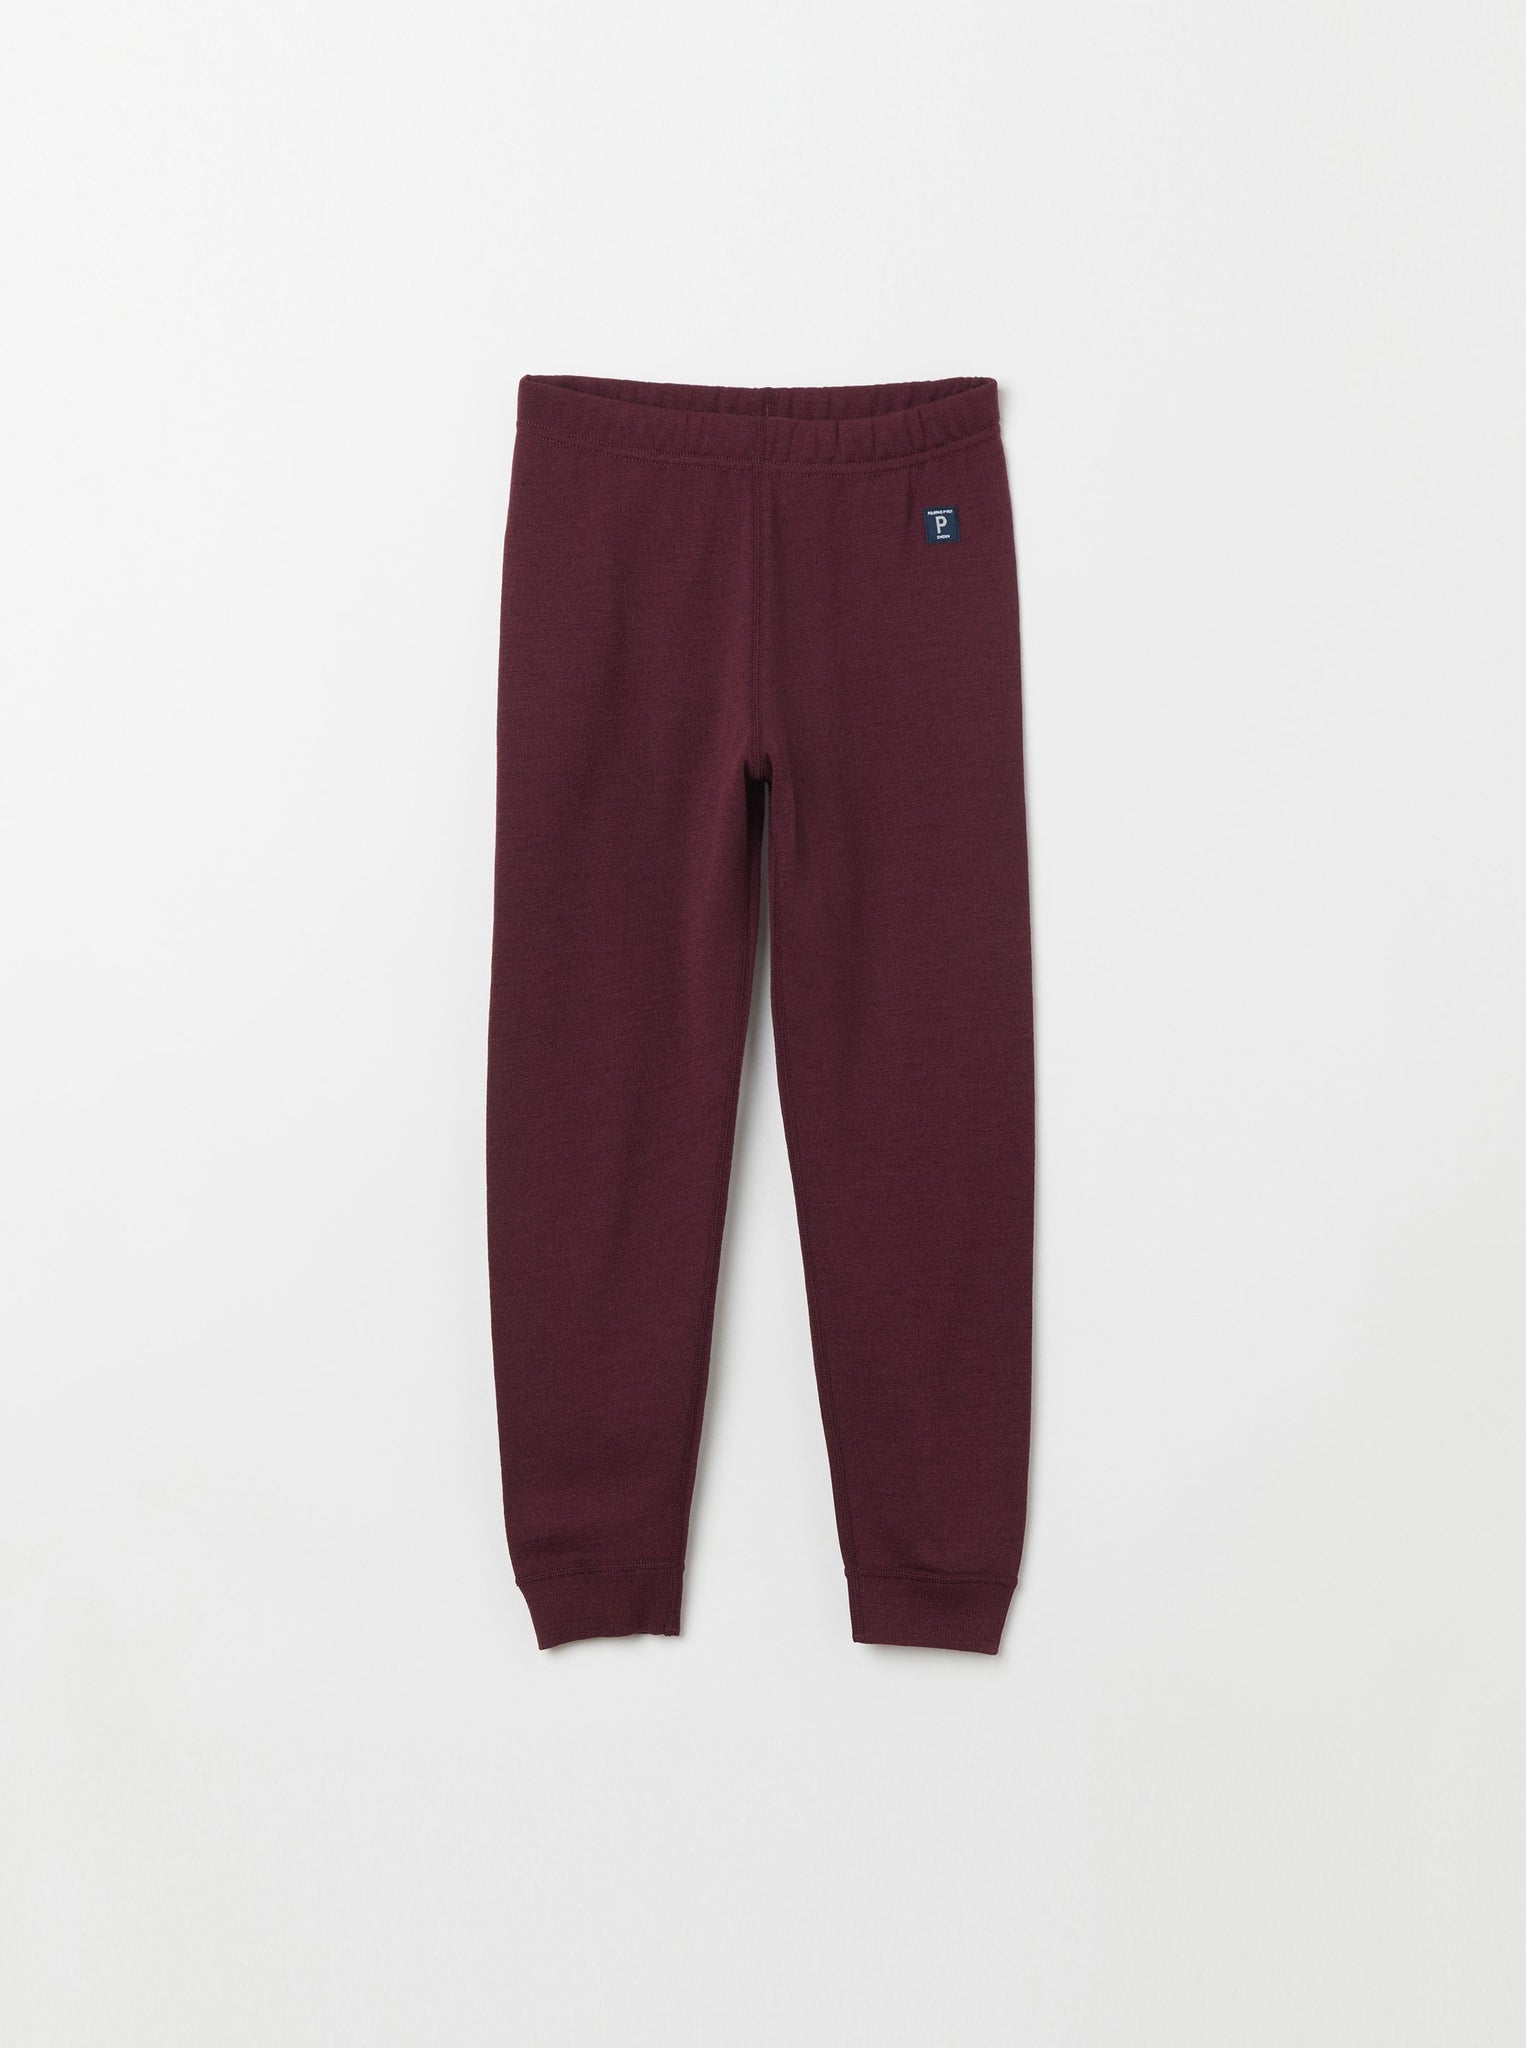 Burgundy Merino Wool Kids Long Johns from the Polarn O. Pyret kidswear collection. Sustainably produced kids outerwear.